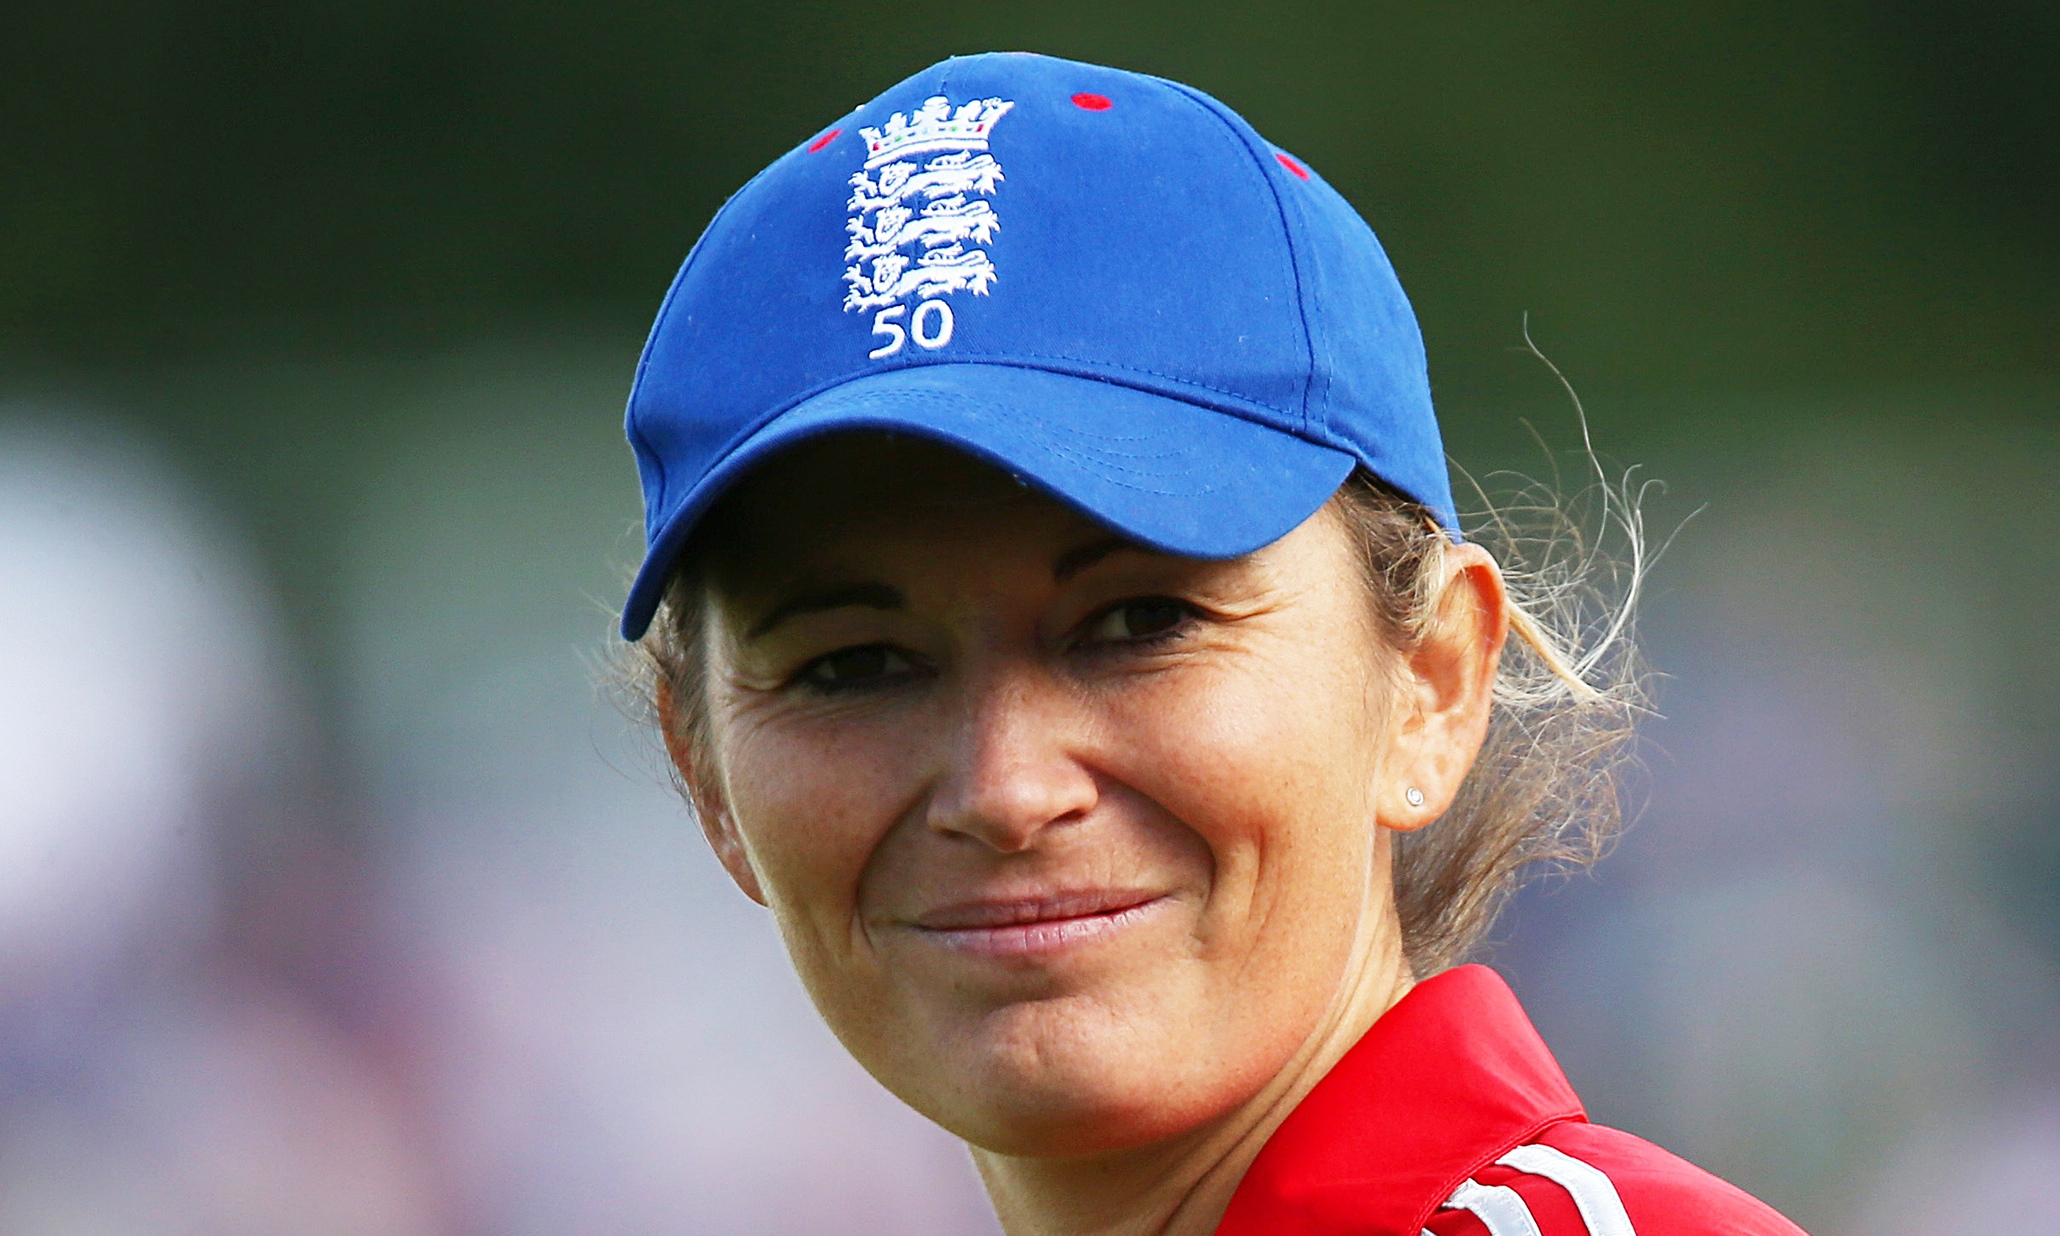 Charlotte Edwards, 200 times an England captain, just keeps on going